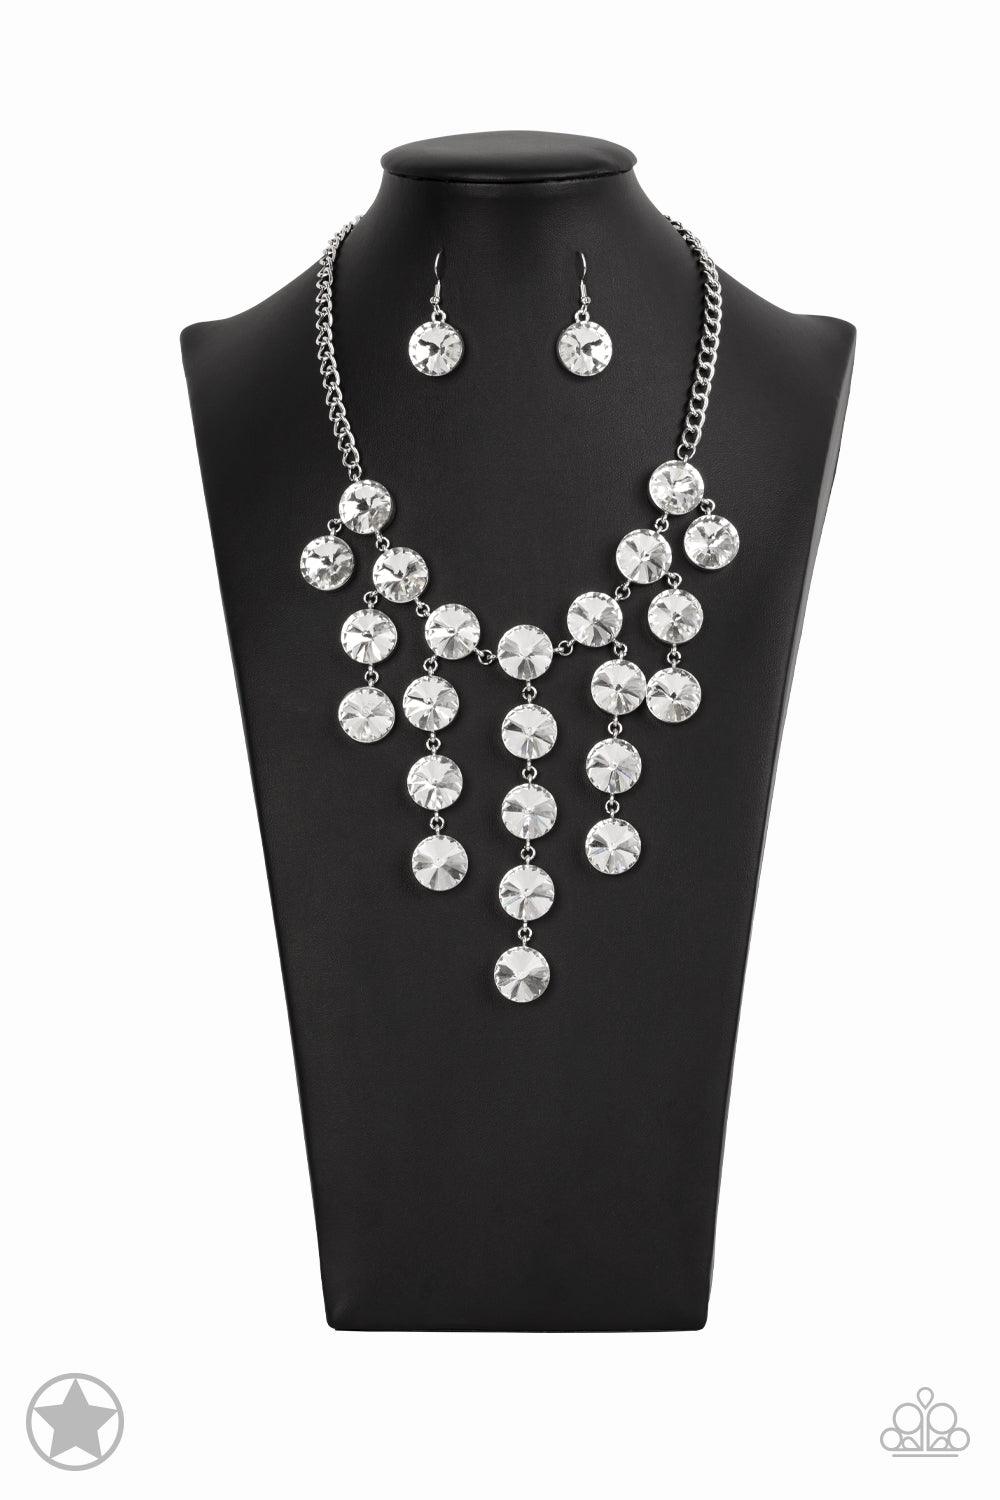 Paparazzi Accessories Spotlight Stunner - White Encased in sleek silver fittings, dramatically oversized white rhinestones delicately link into twinkly tassels that taper off into a jaw-dropping fringe below the collar. Features an adjustable clasp closur